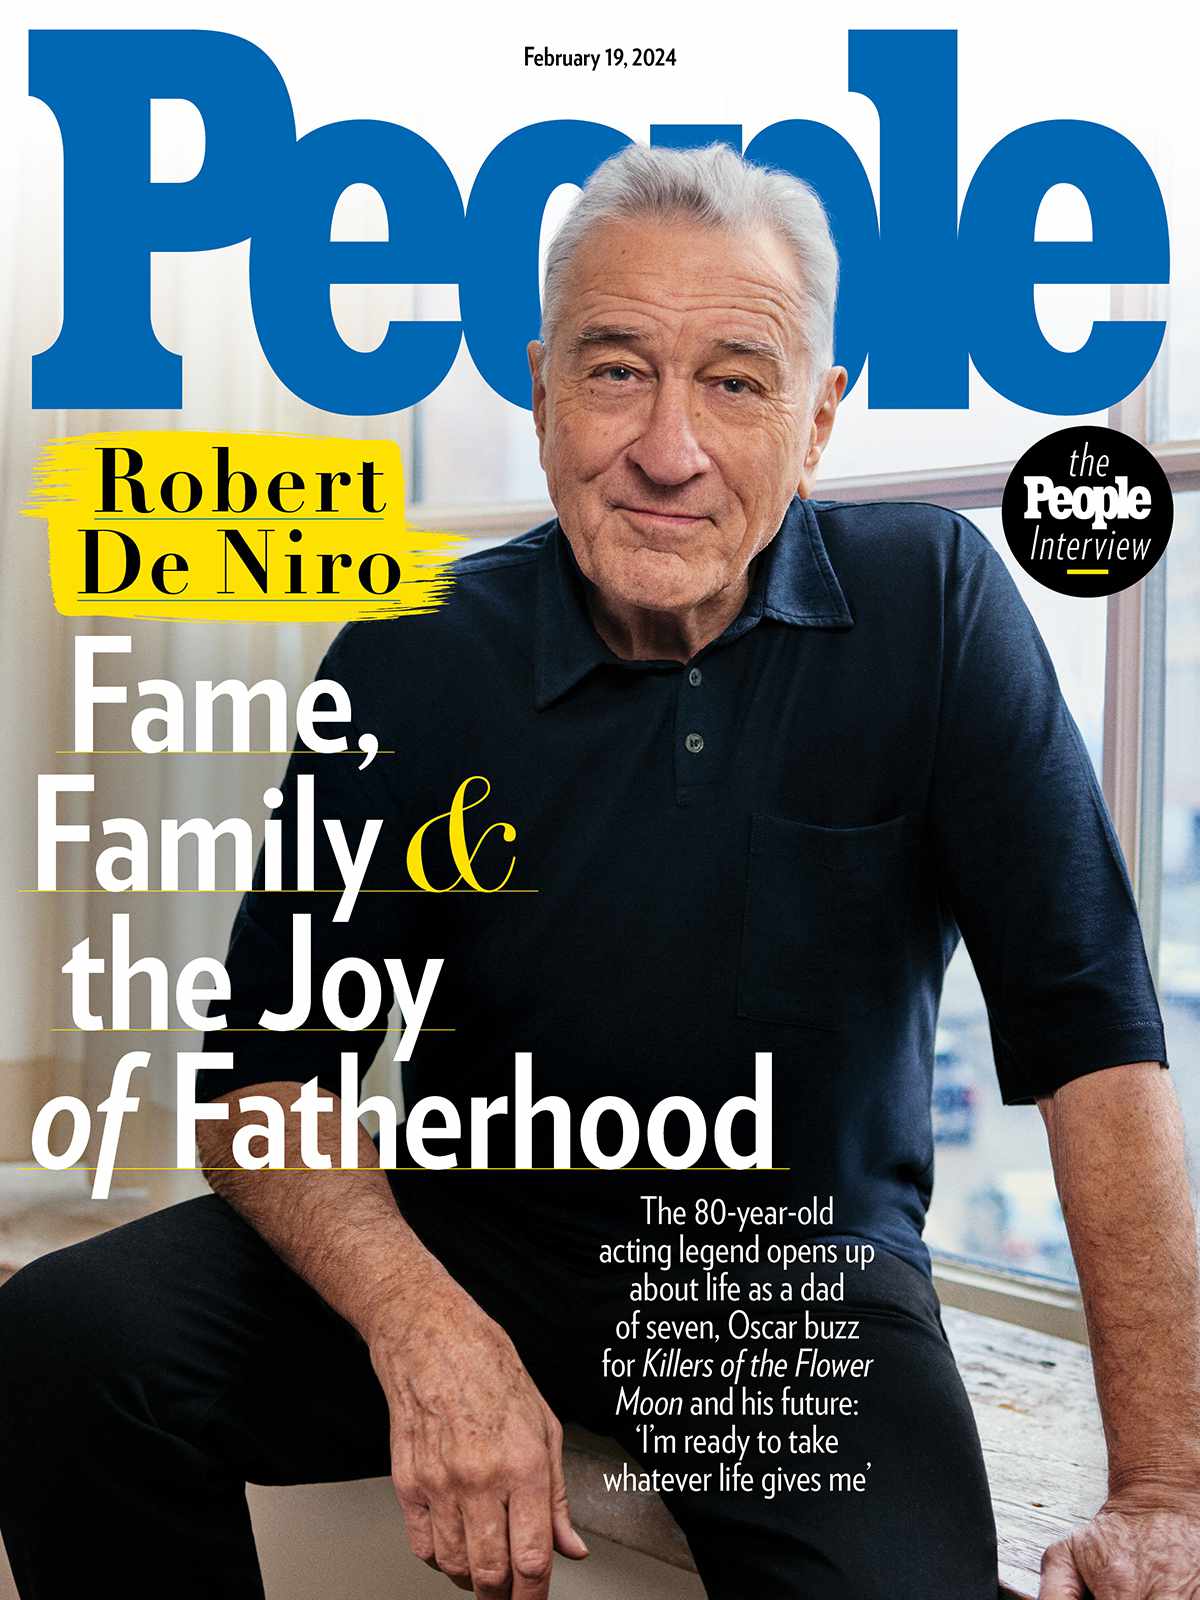 Robert De Niro photographed at The Greenwich Hotel on January 27, 2024.